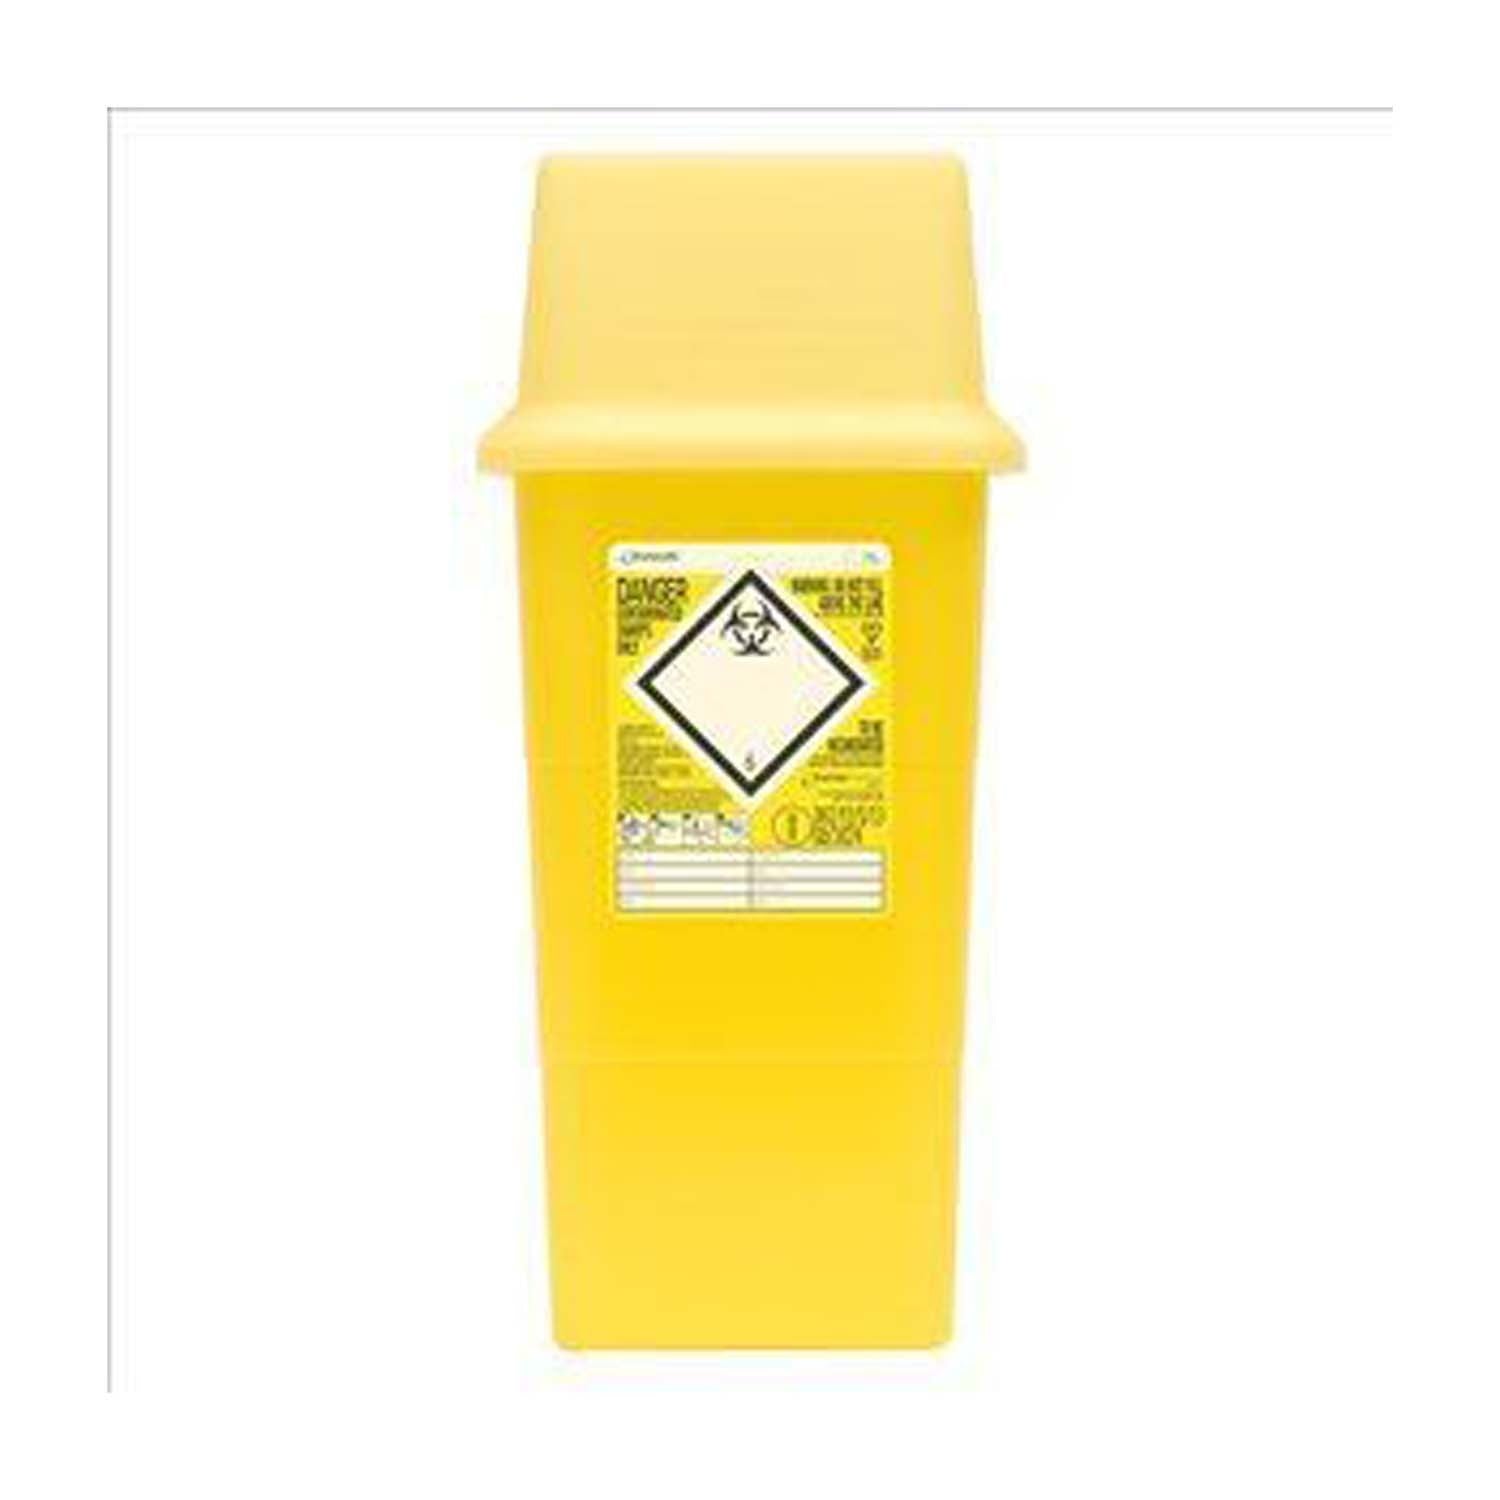 Frontier Sharpsafe Sharps Container | Grey Body | Yellow Lid | 7L | Single